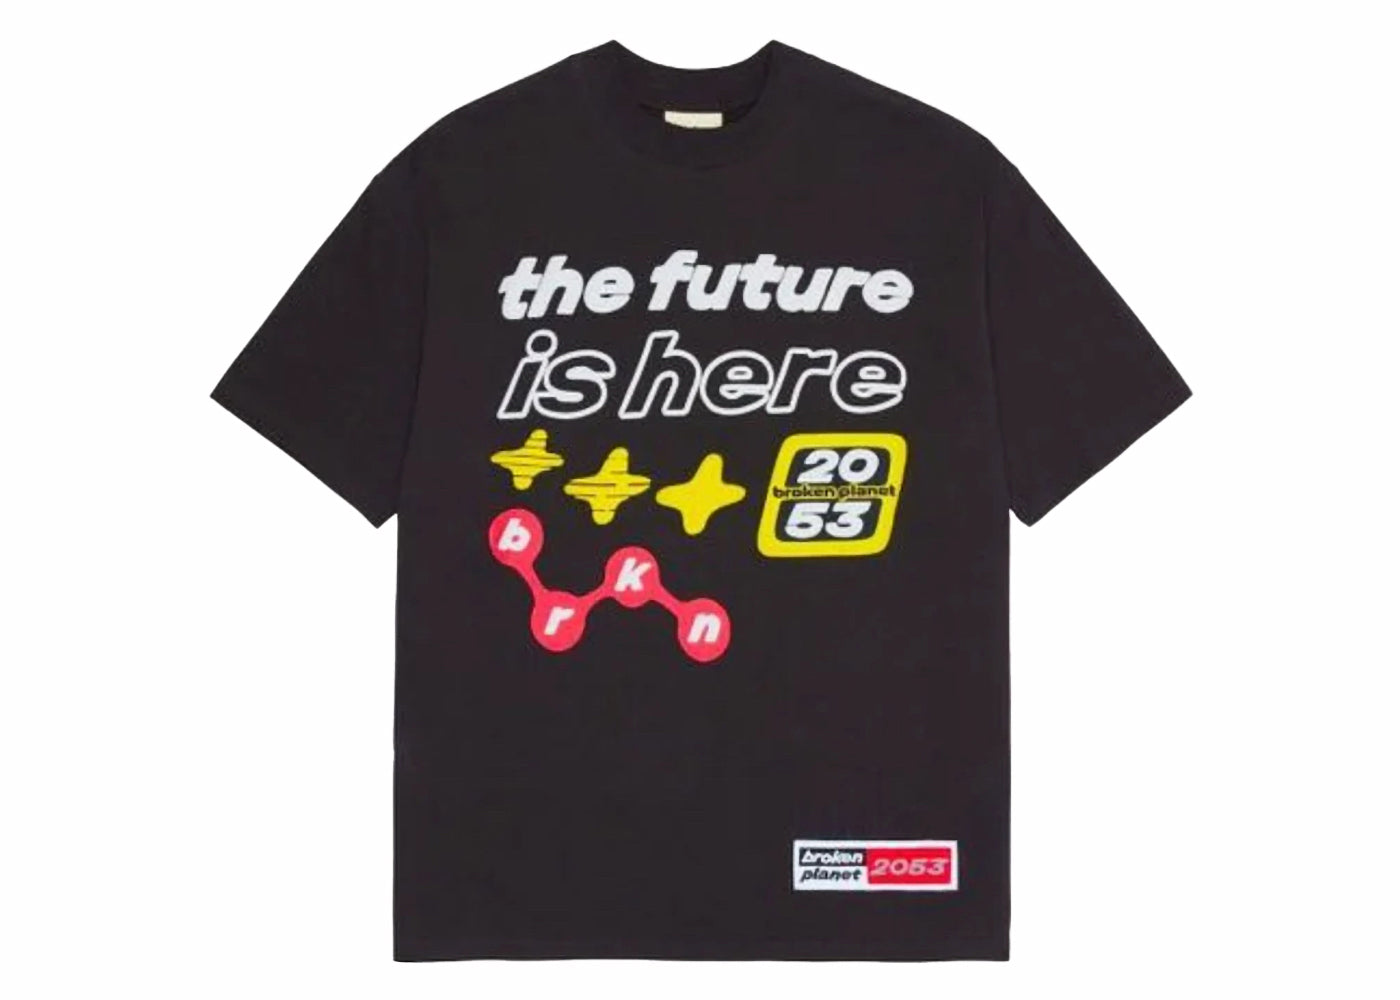 BROKEN PLANET THE FUTURE IS HERE T-SHIRT BLACK